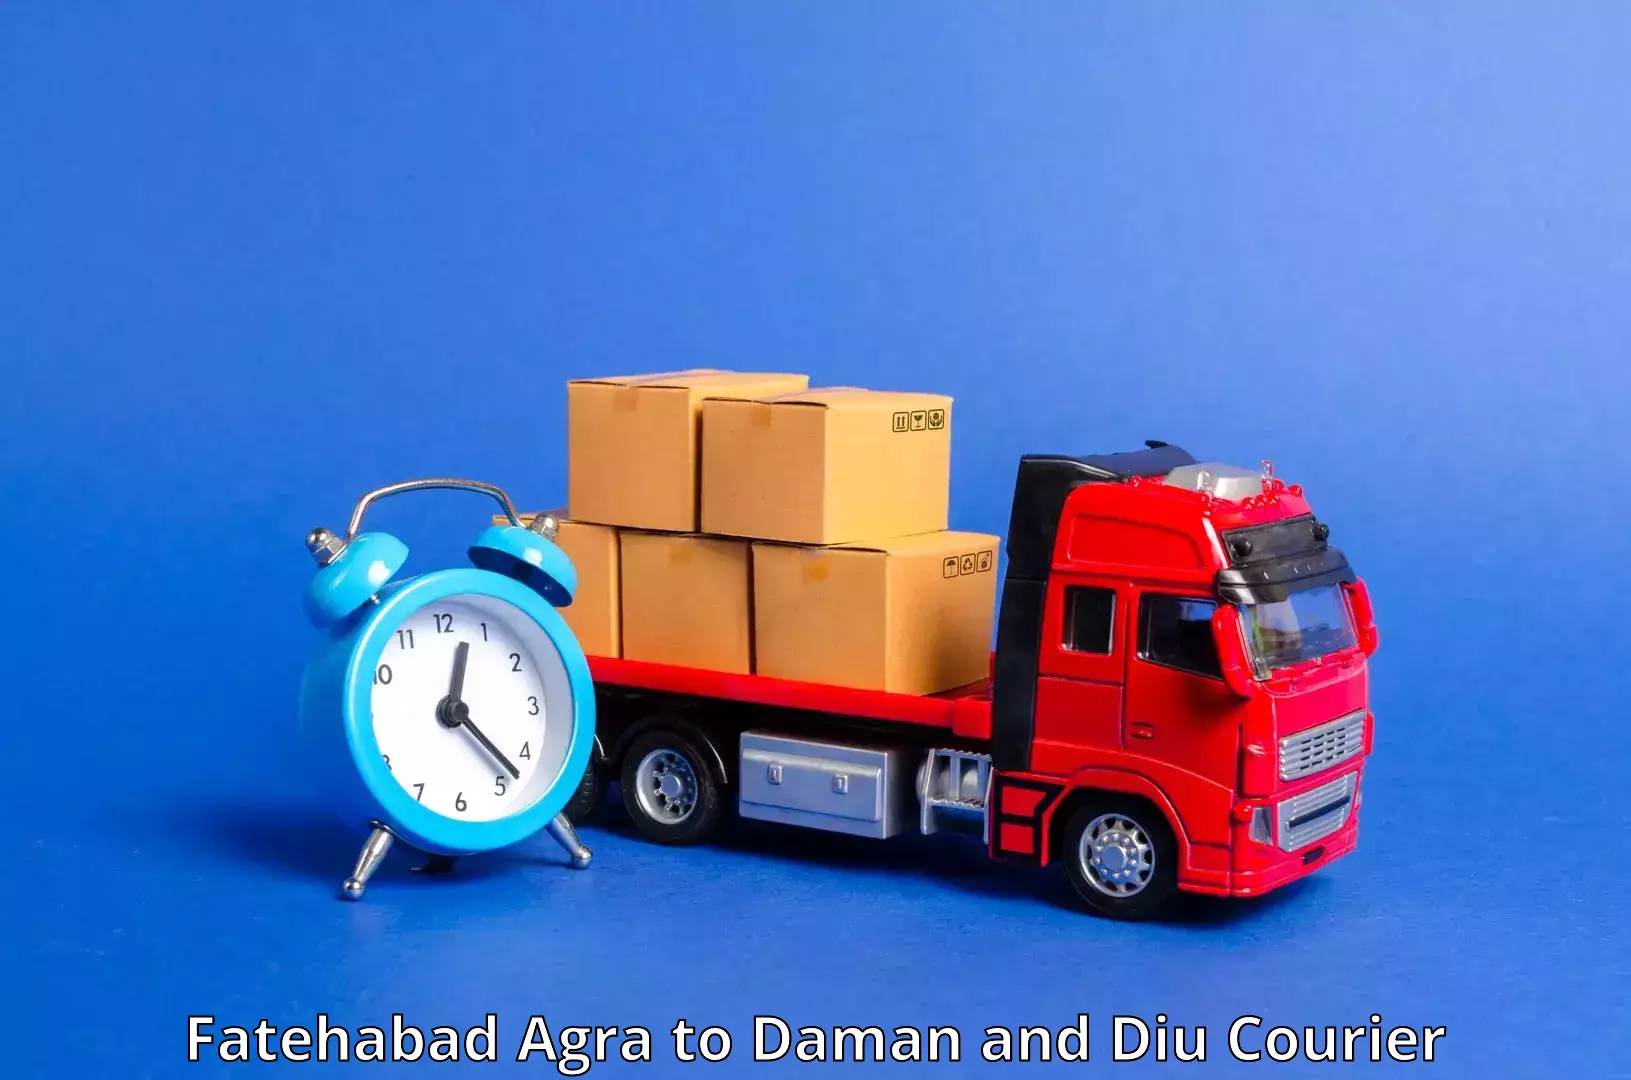 Next day courier Fatehabad Agra to Diu